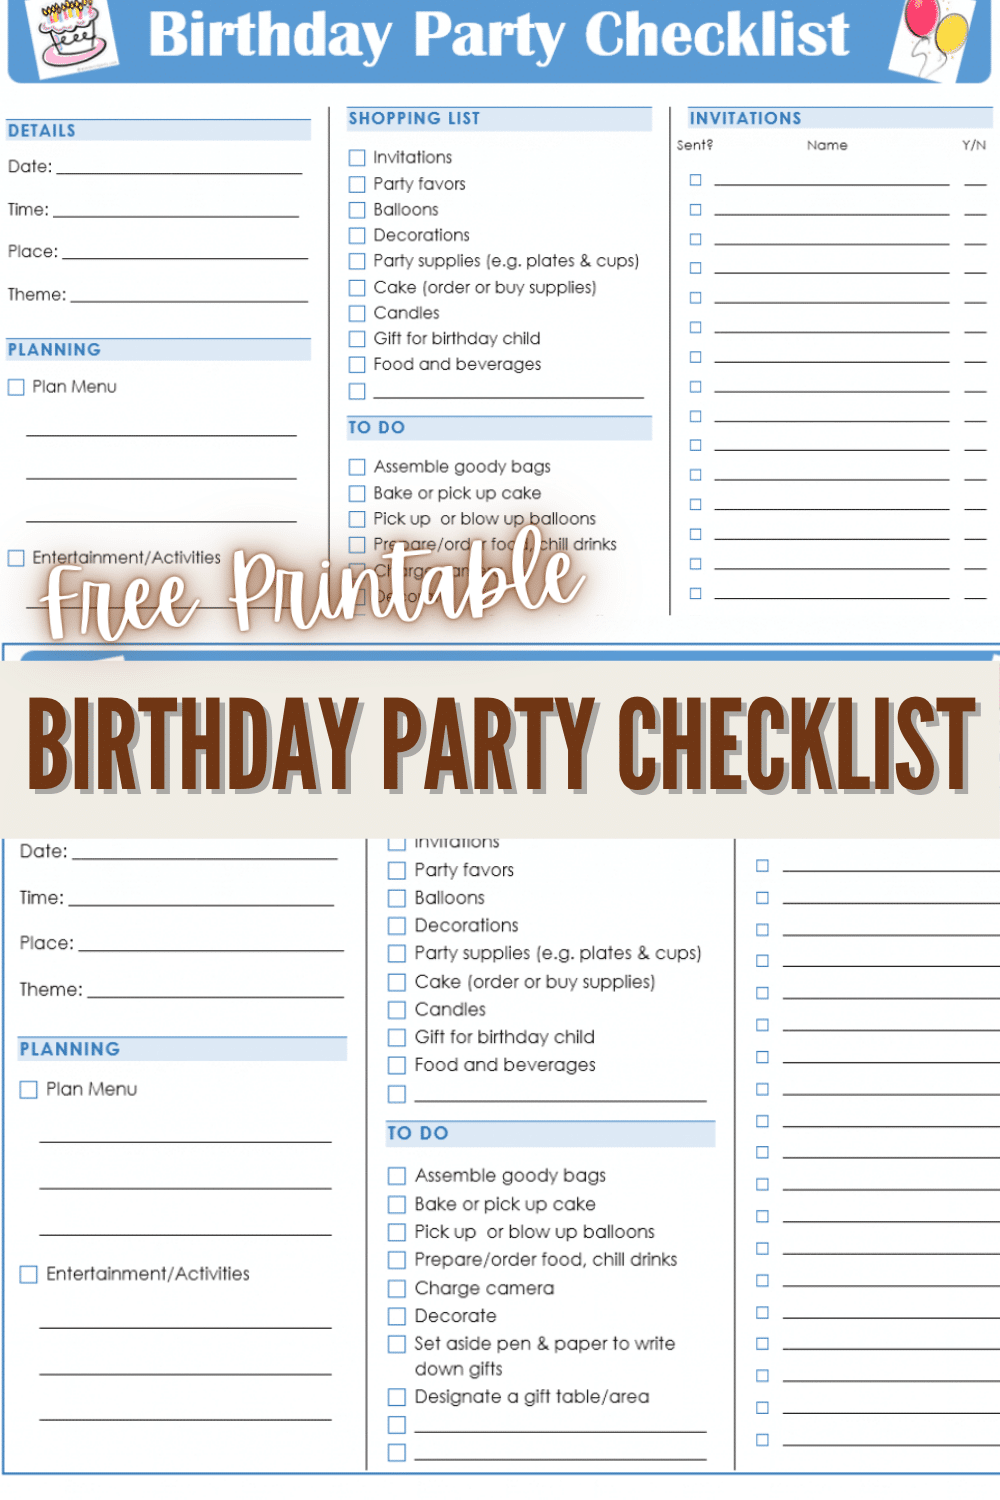 A free printable birthday party checklist to help you plan your child's next birthday party with less stress, and so you don't forget anything. #birthdayparty #checklist #freeprintable via @wondermomwannab